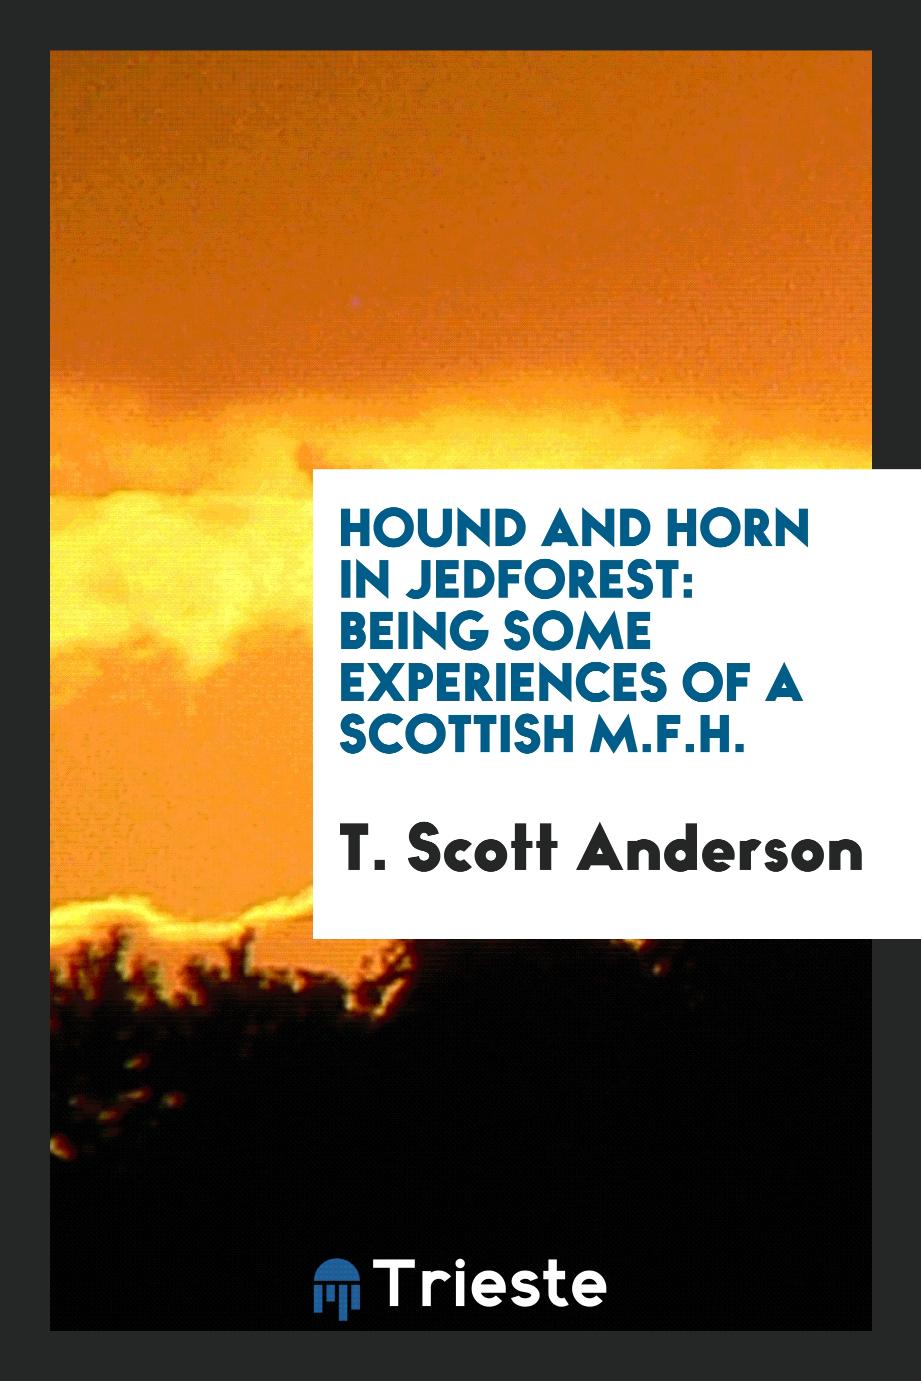 Hound and horn in Jedforest: being some experiences of a Scottish M.F.H.